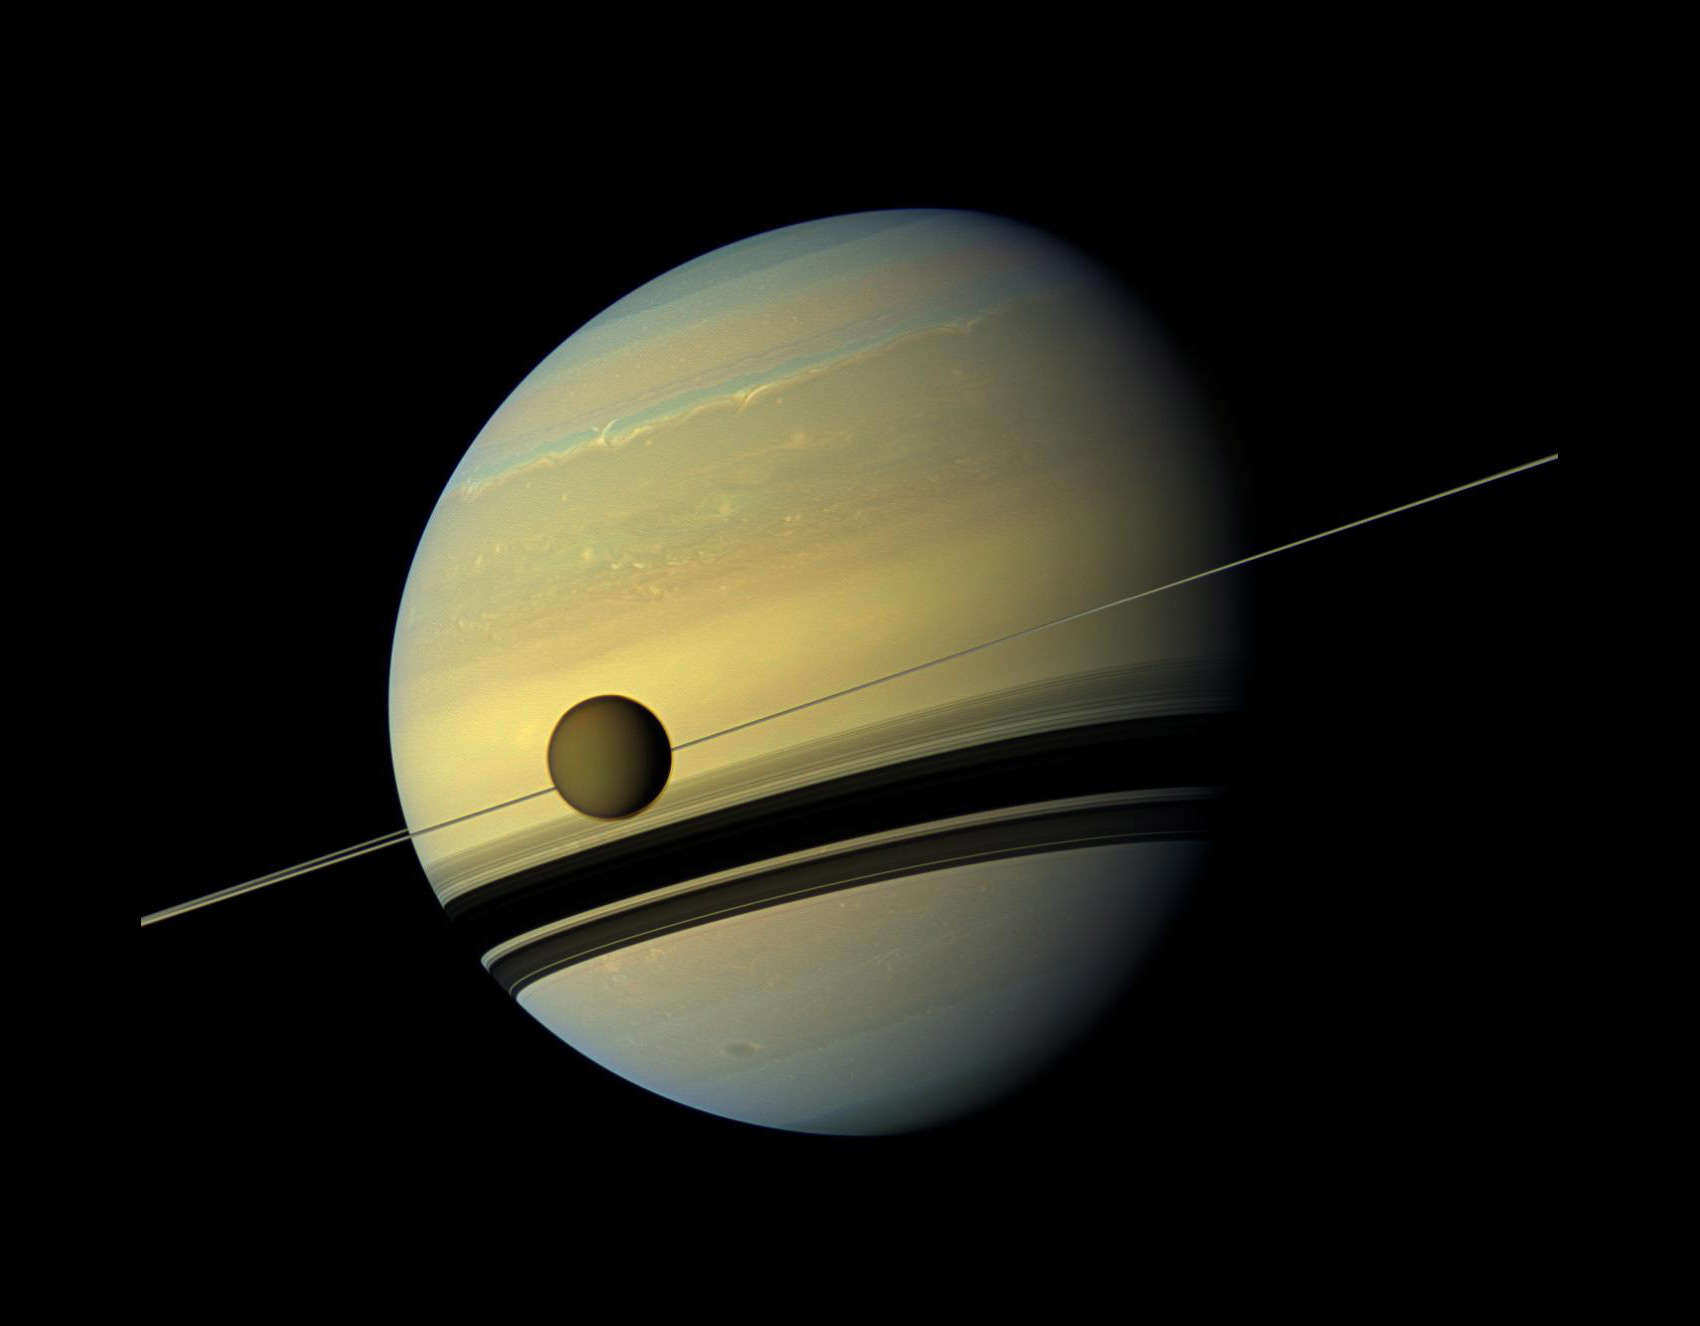 The giant moon Titan in front of Saturn's edge-on rings, seen by the Cassini spacecraft in 2012. Credit: NASA/JPL-Caltech/Space Science Institute